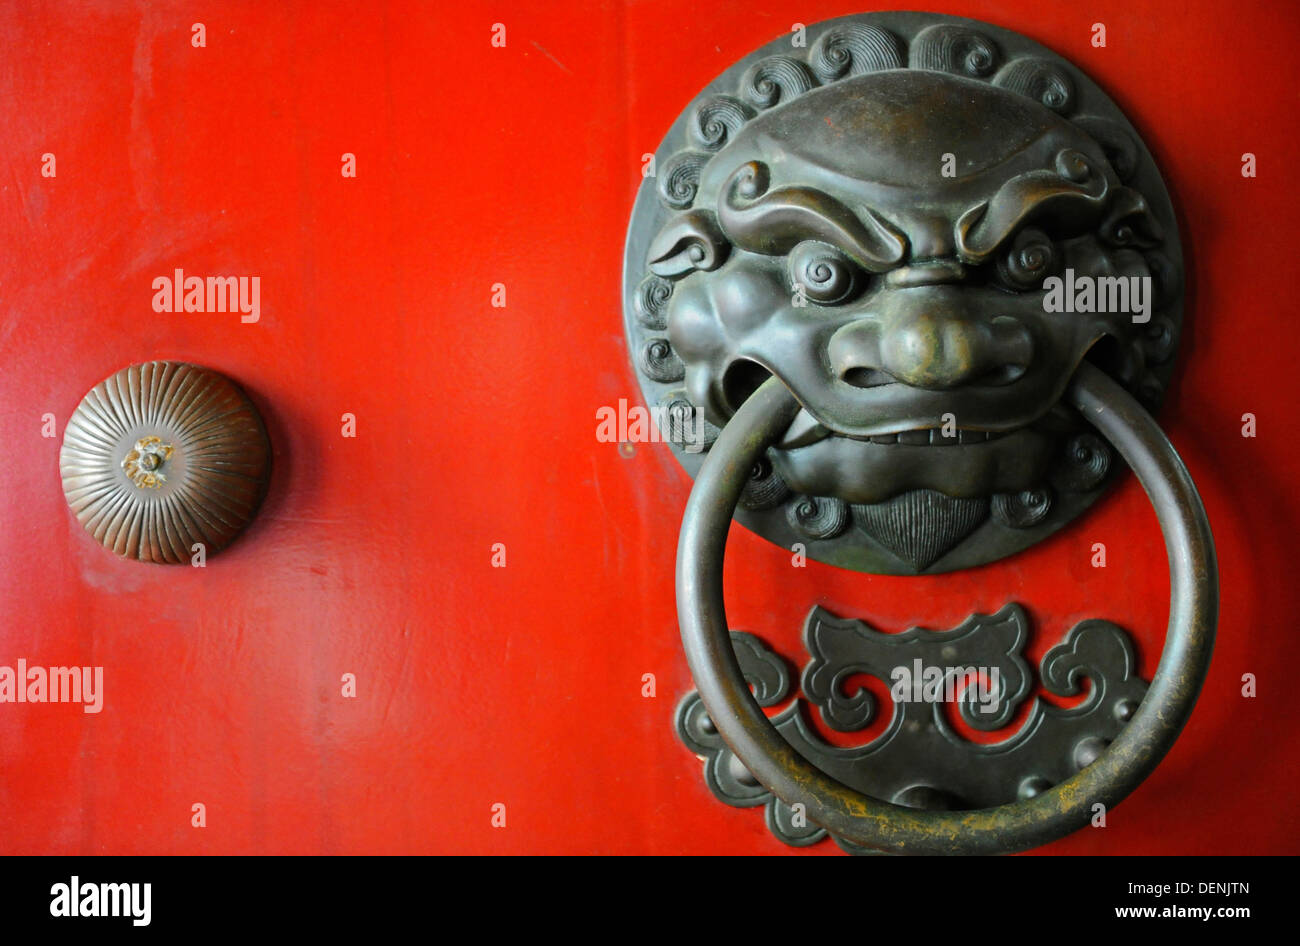 An ornate door knocker in the shape of a fierce warrior on the front of a studded red door. Stock Photo